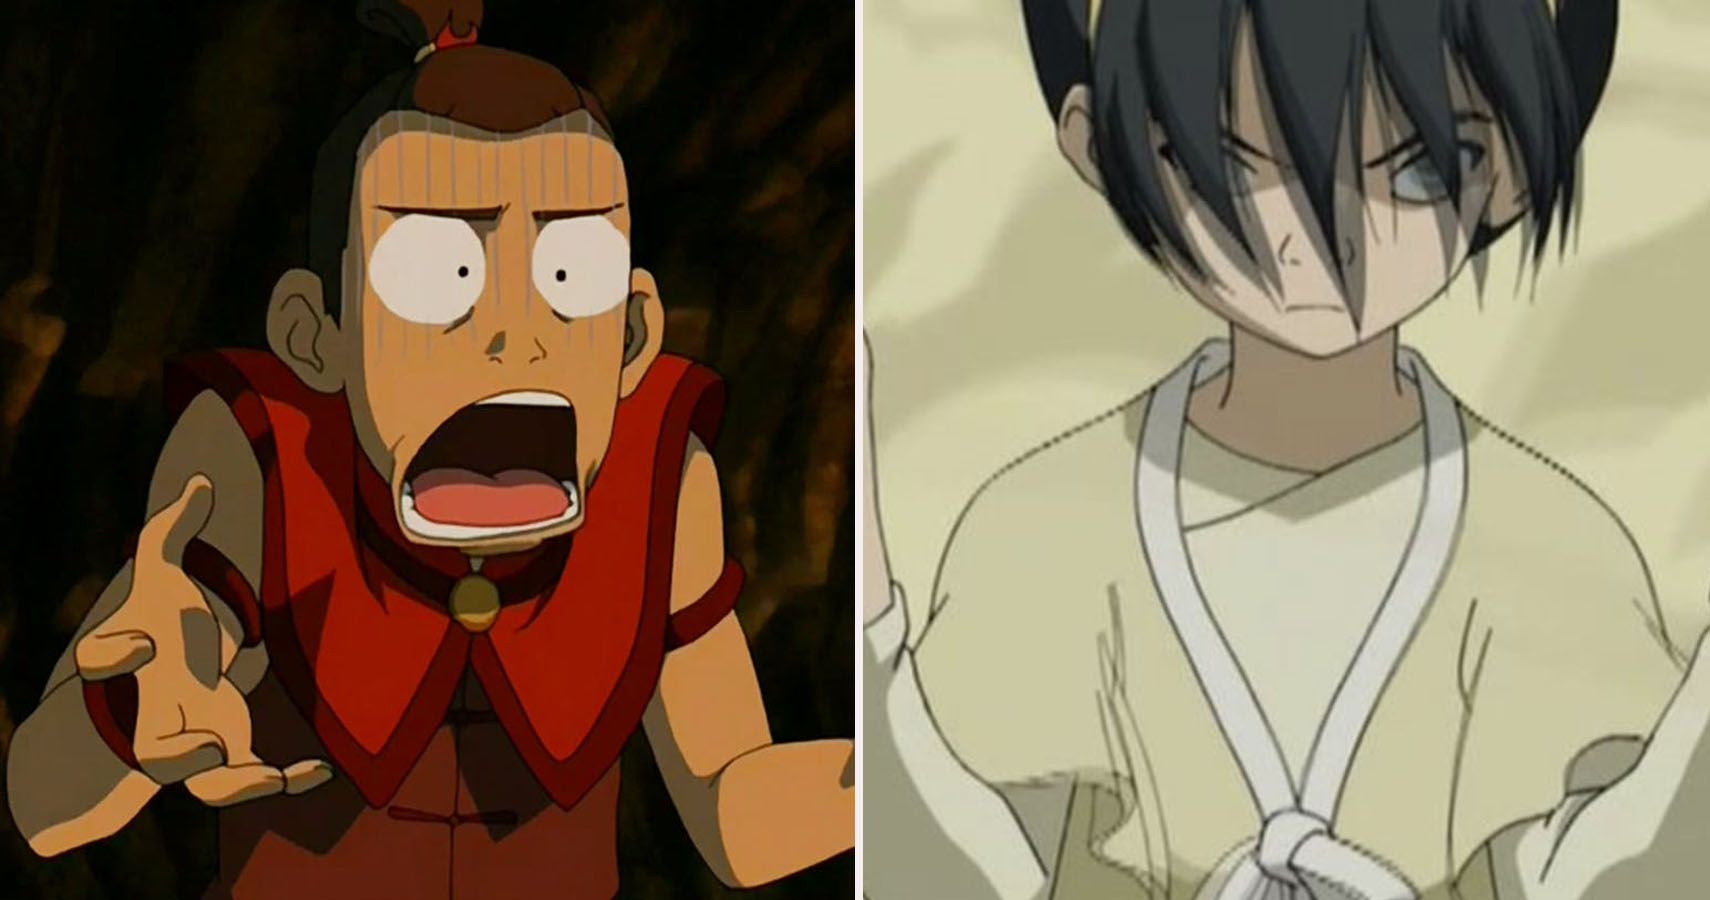 10 Worst Episodes Of Avatar The Last Airbender According To